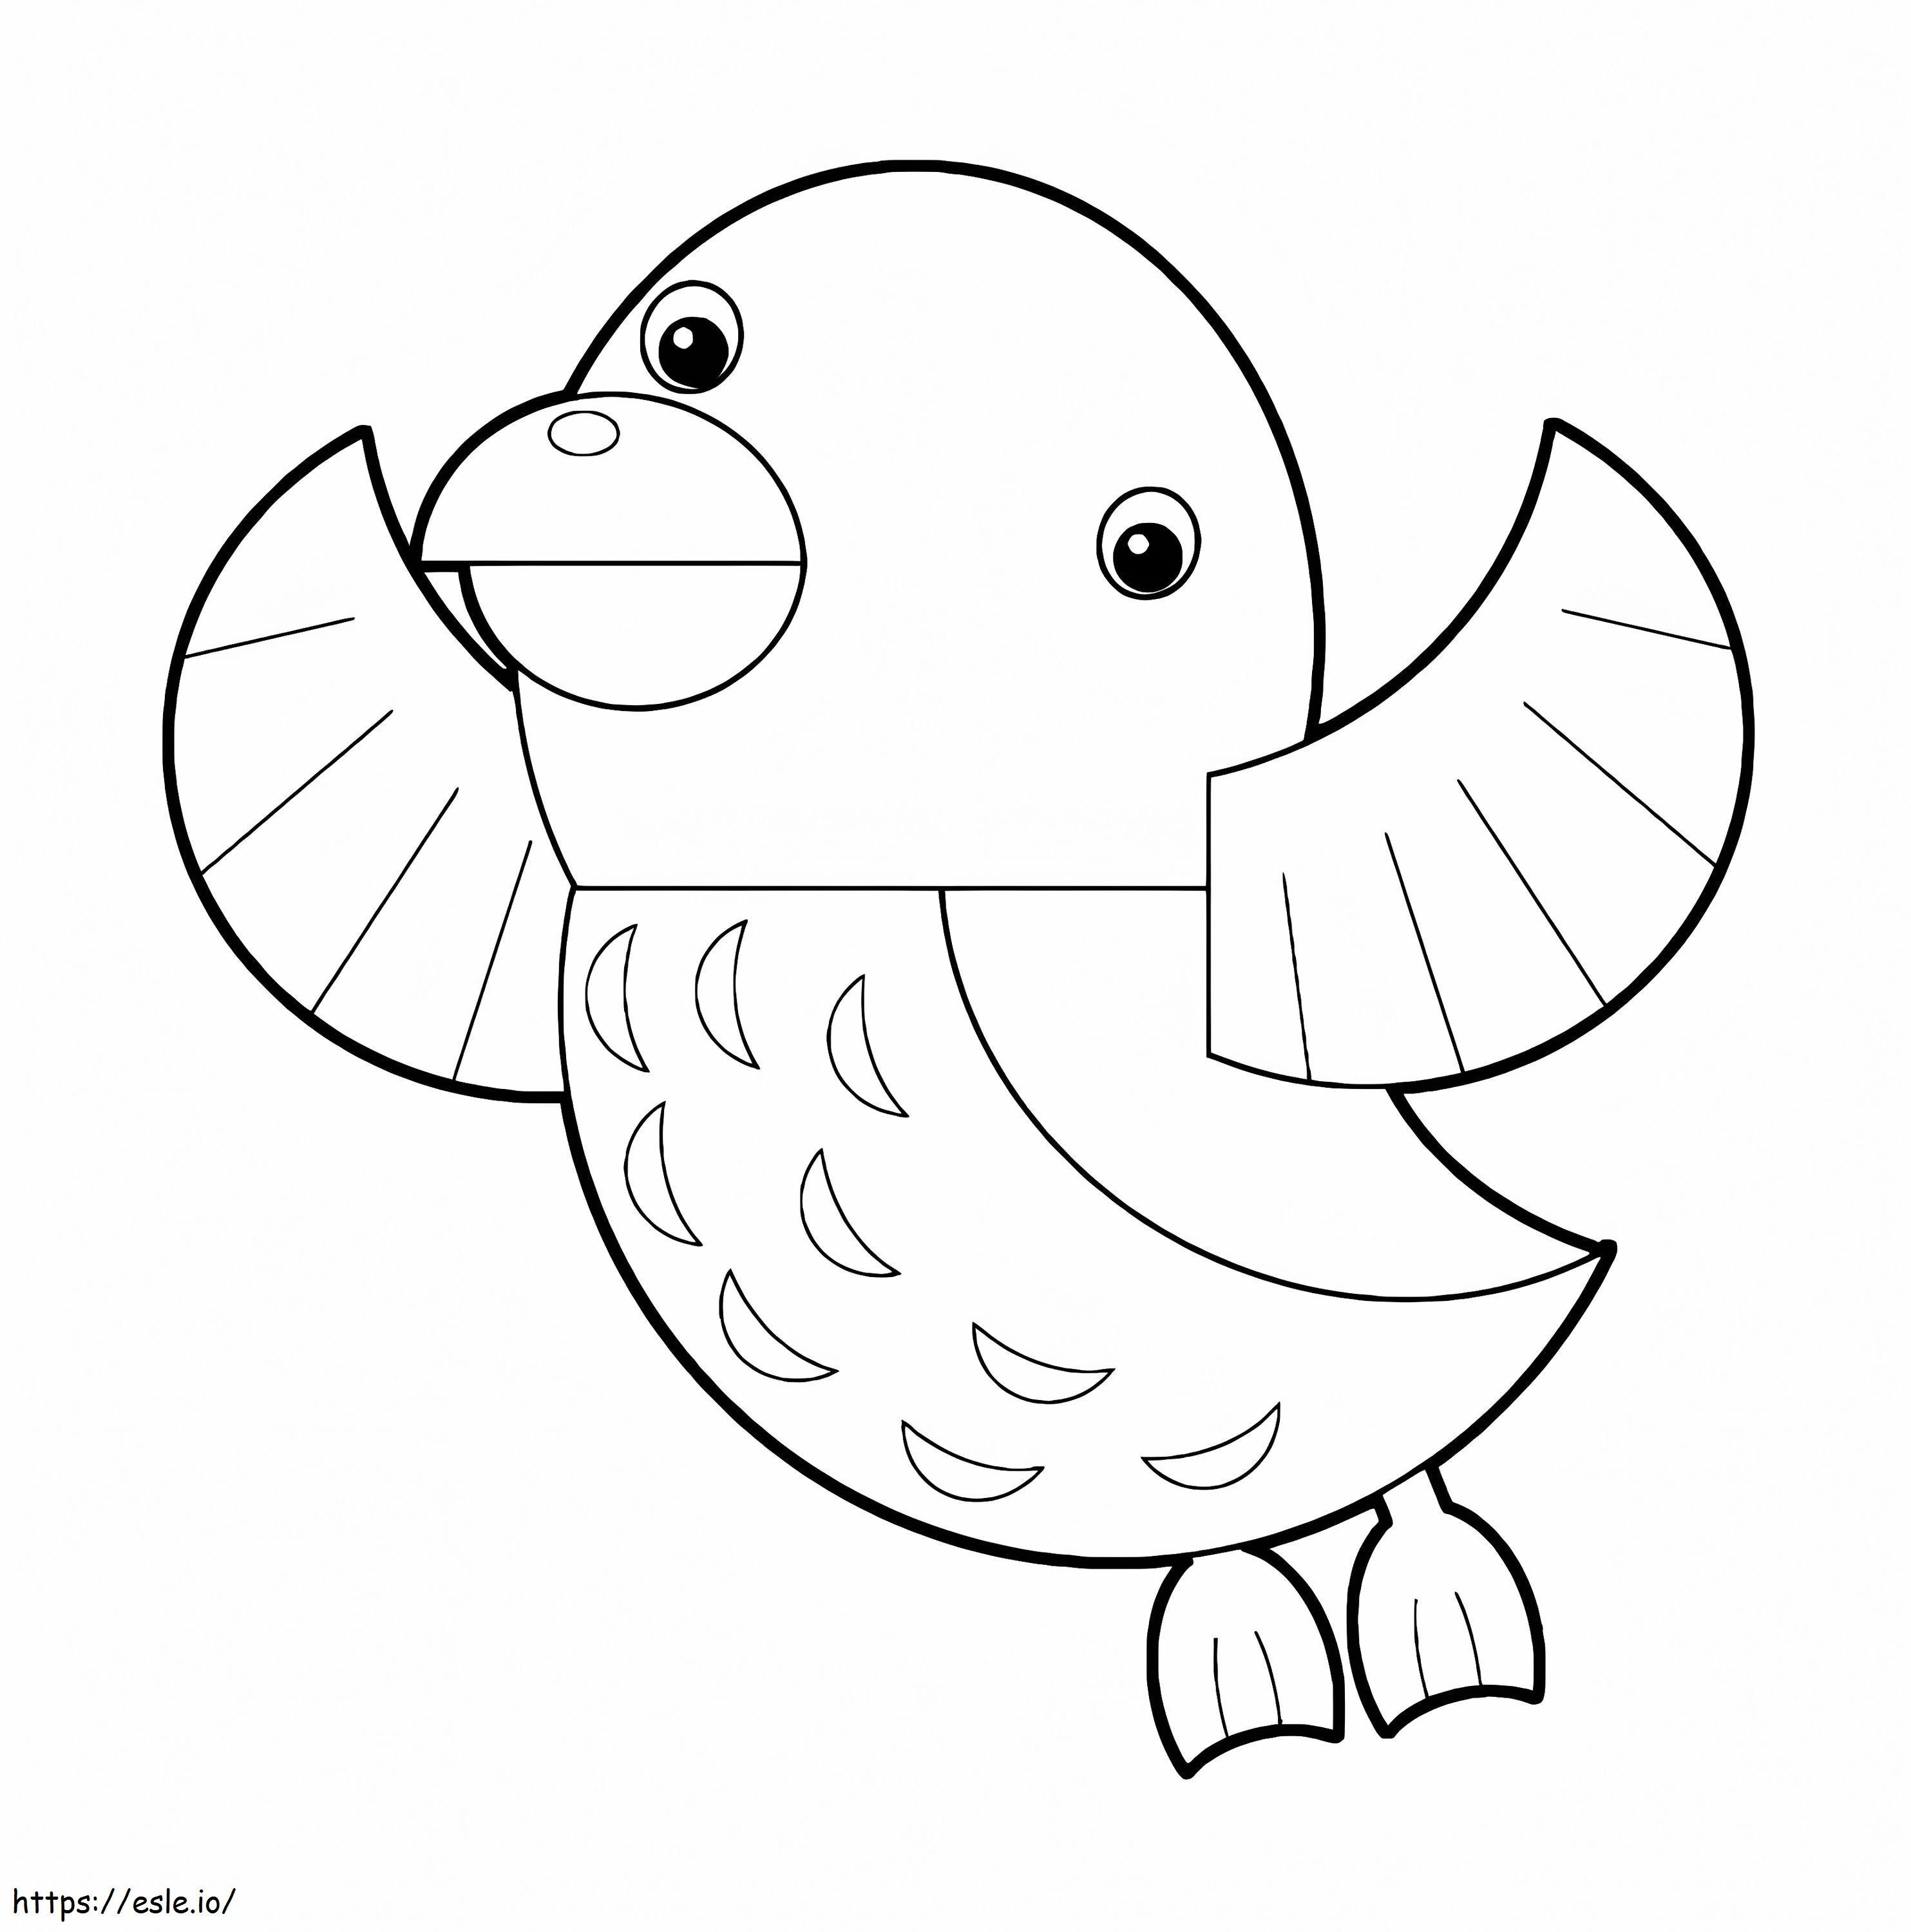 The Cute Auk coloring page